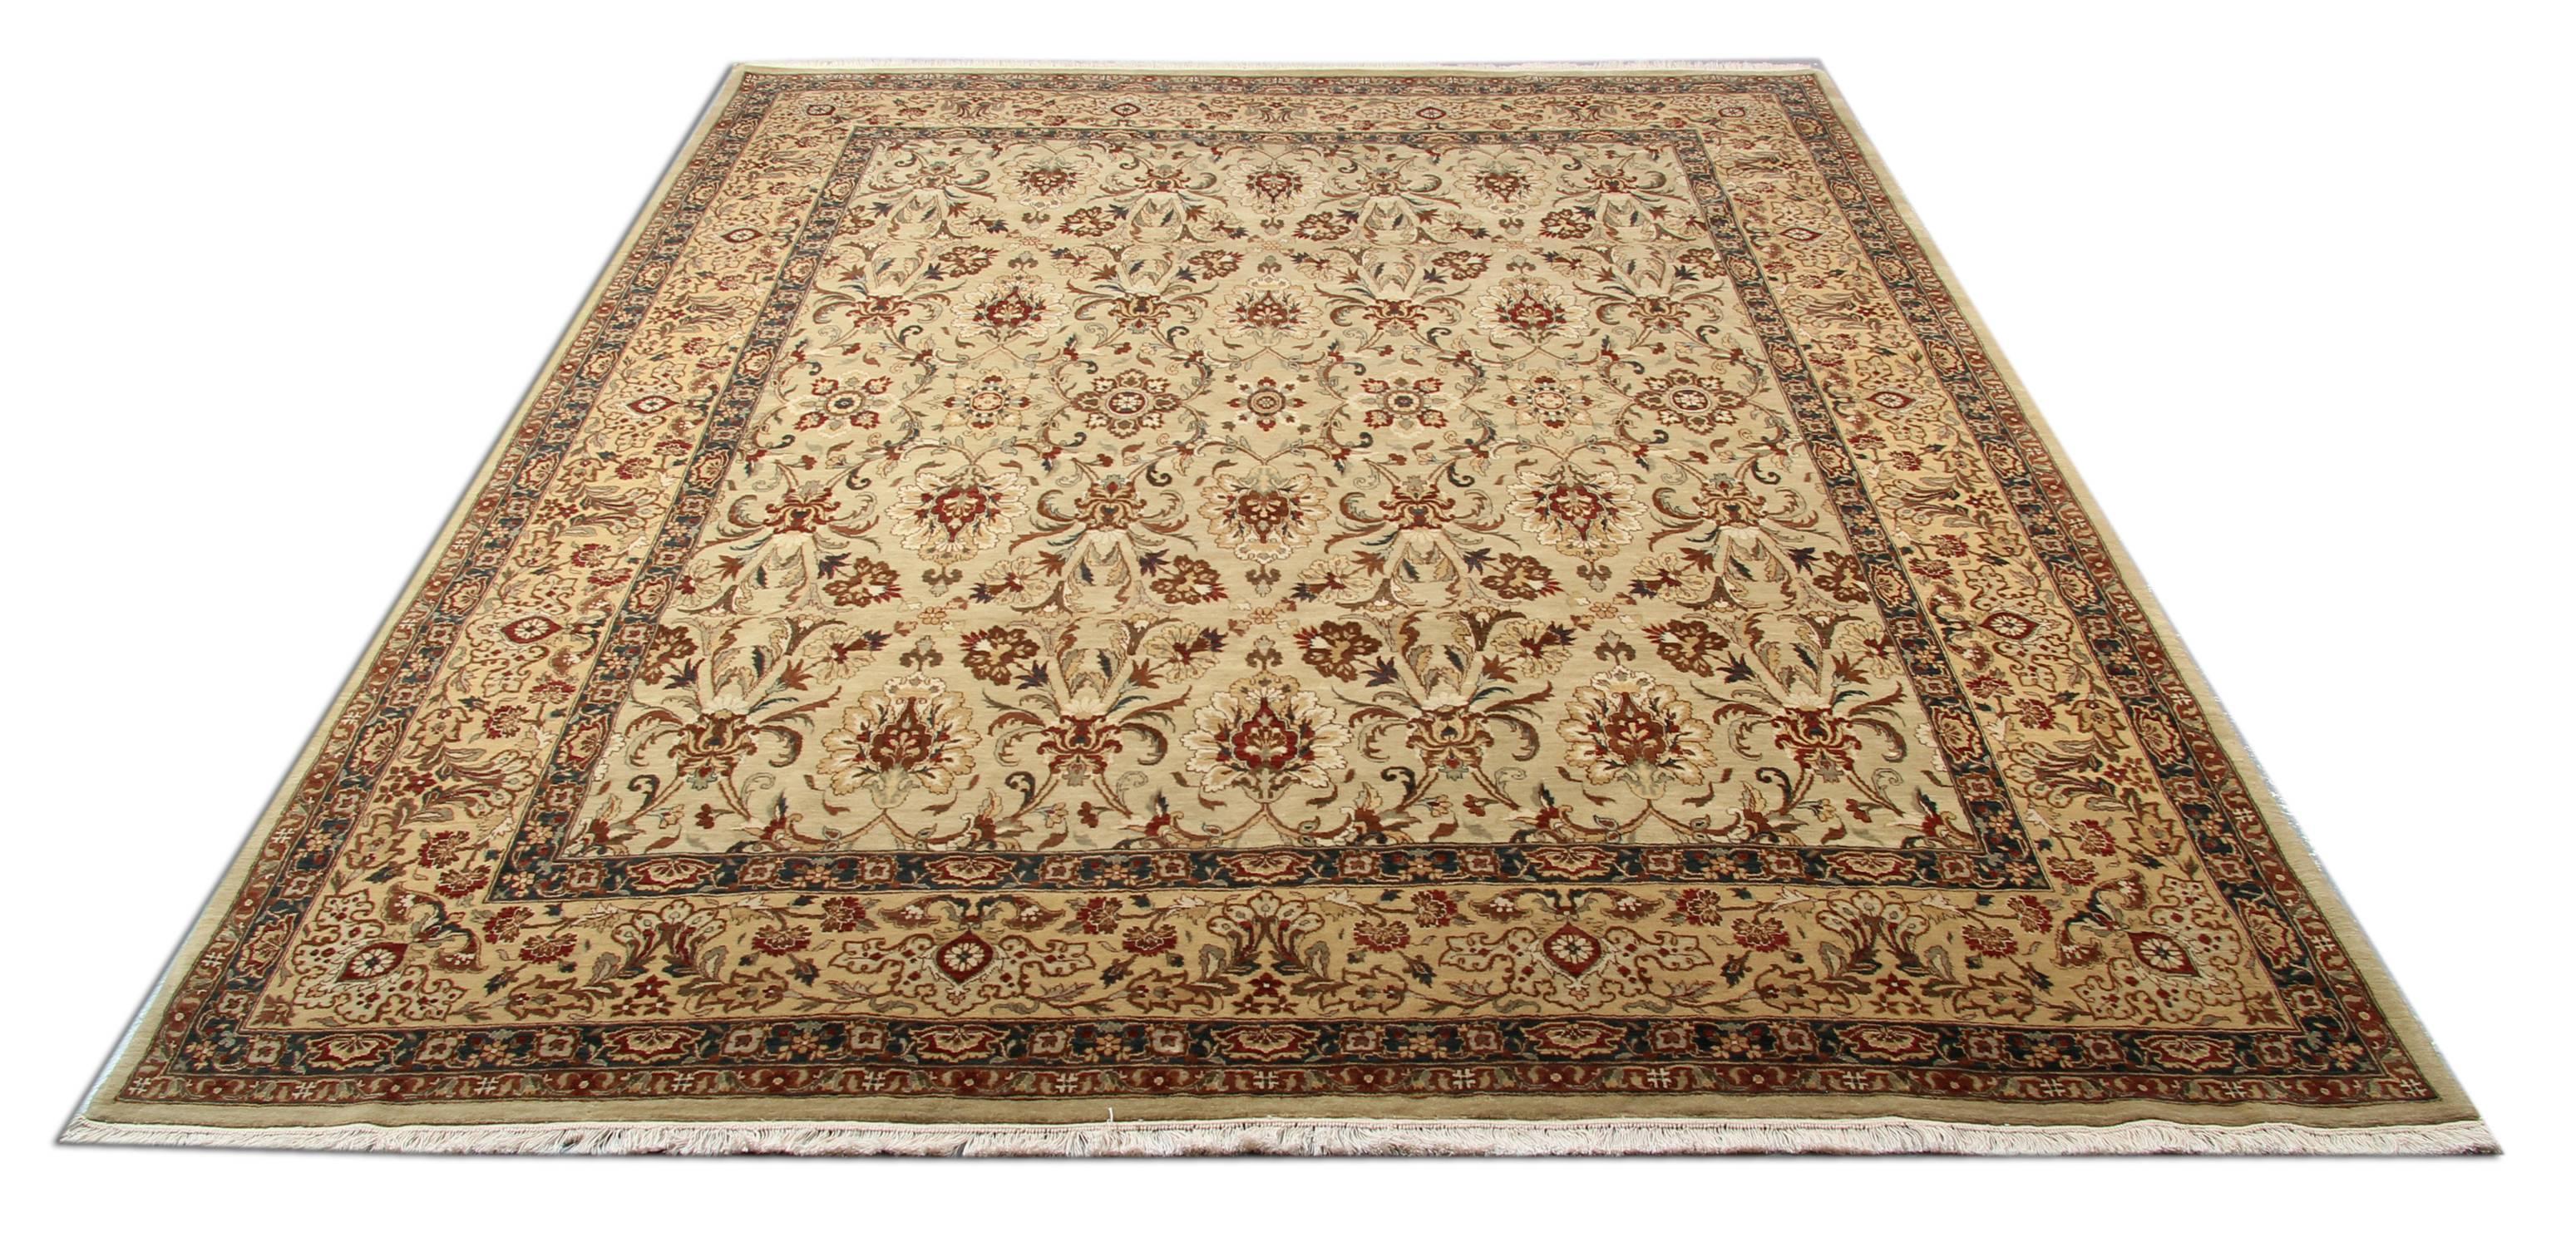 This fine wool area rug has been woven by hand and features a fantastic floral design through the centre. The design features a repeat all over pattern and a highly-decorative repeat pattern border. The design and colour in this piece make it the